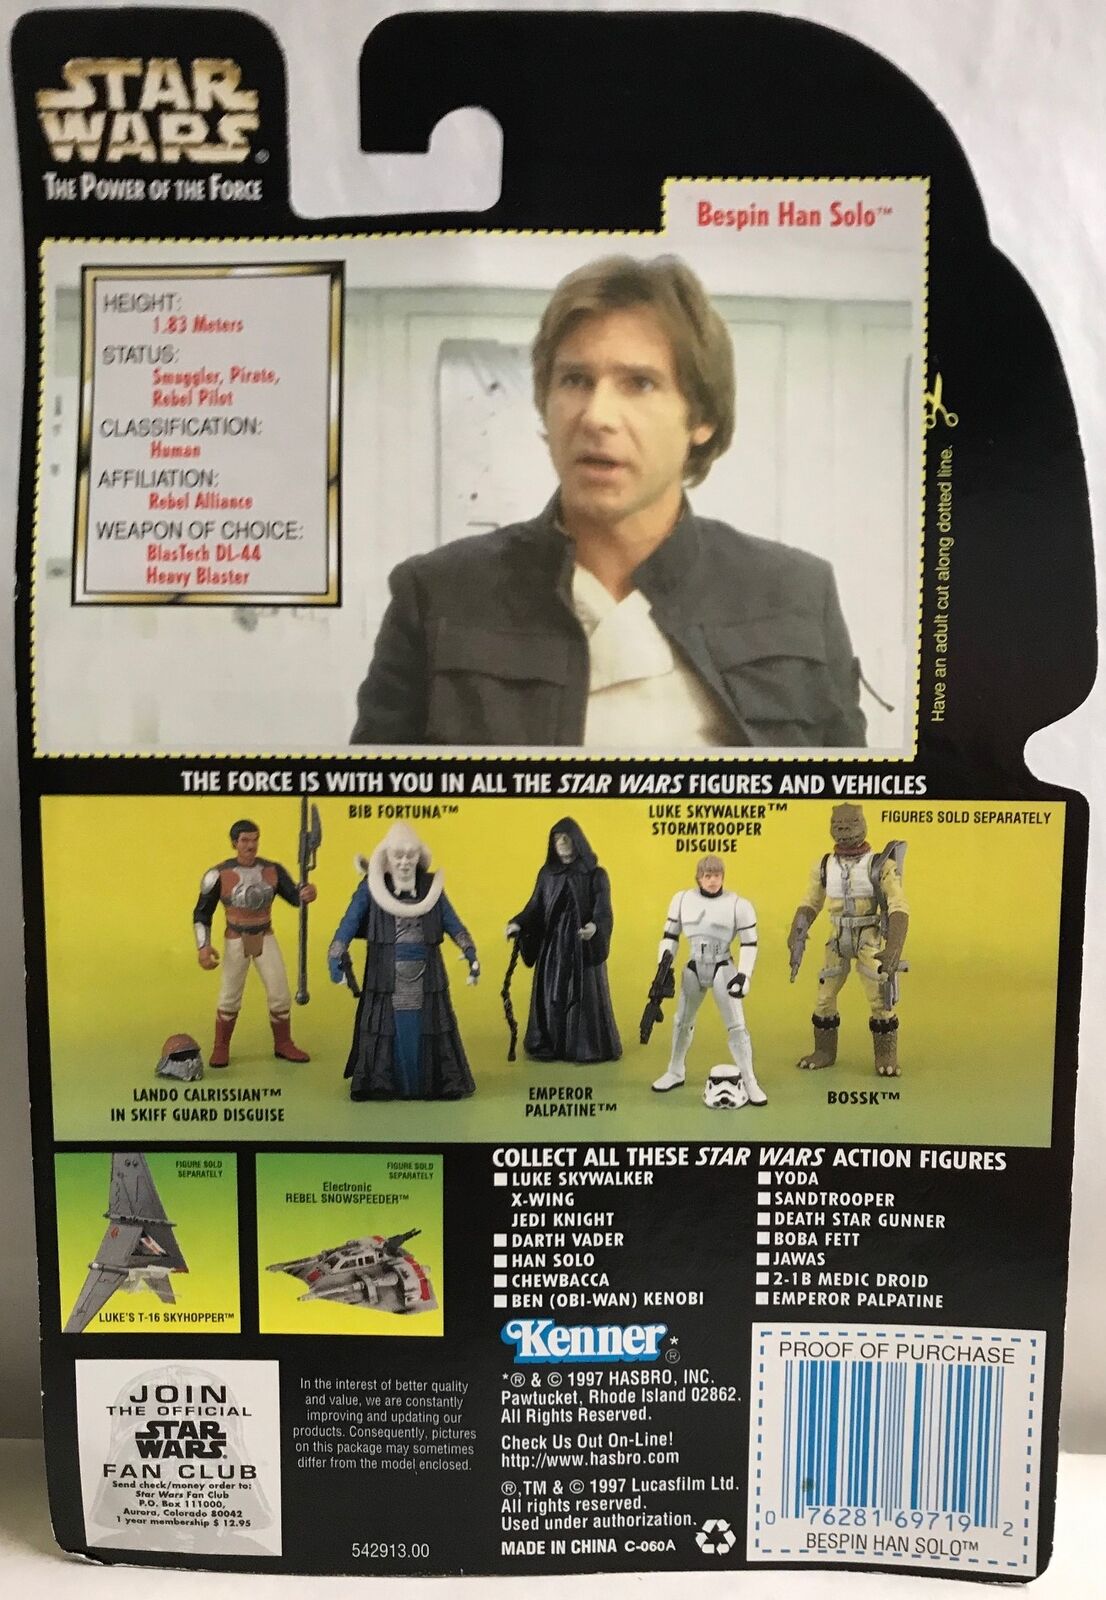 STAR WARS - KENNER - POTF - BESPIN HAN SOLO - with Heavy Assault Rifle and Blaster